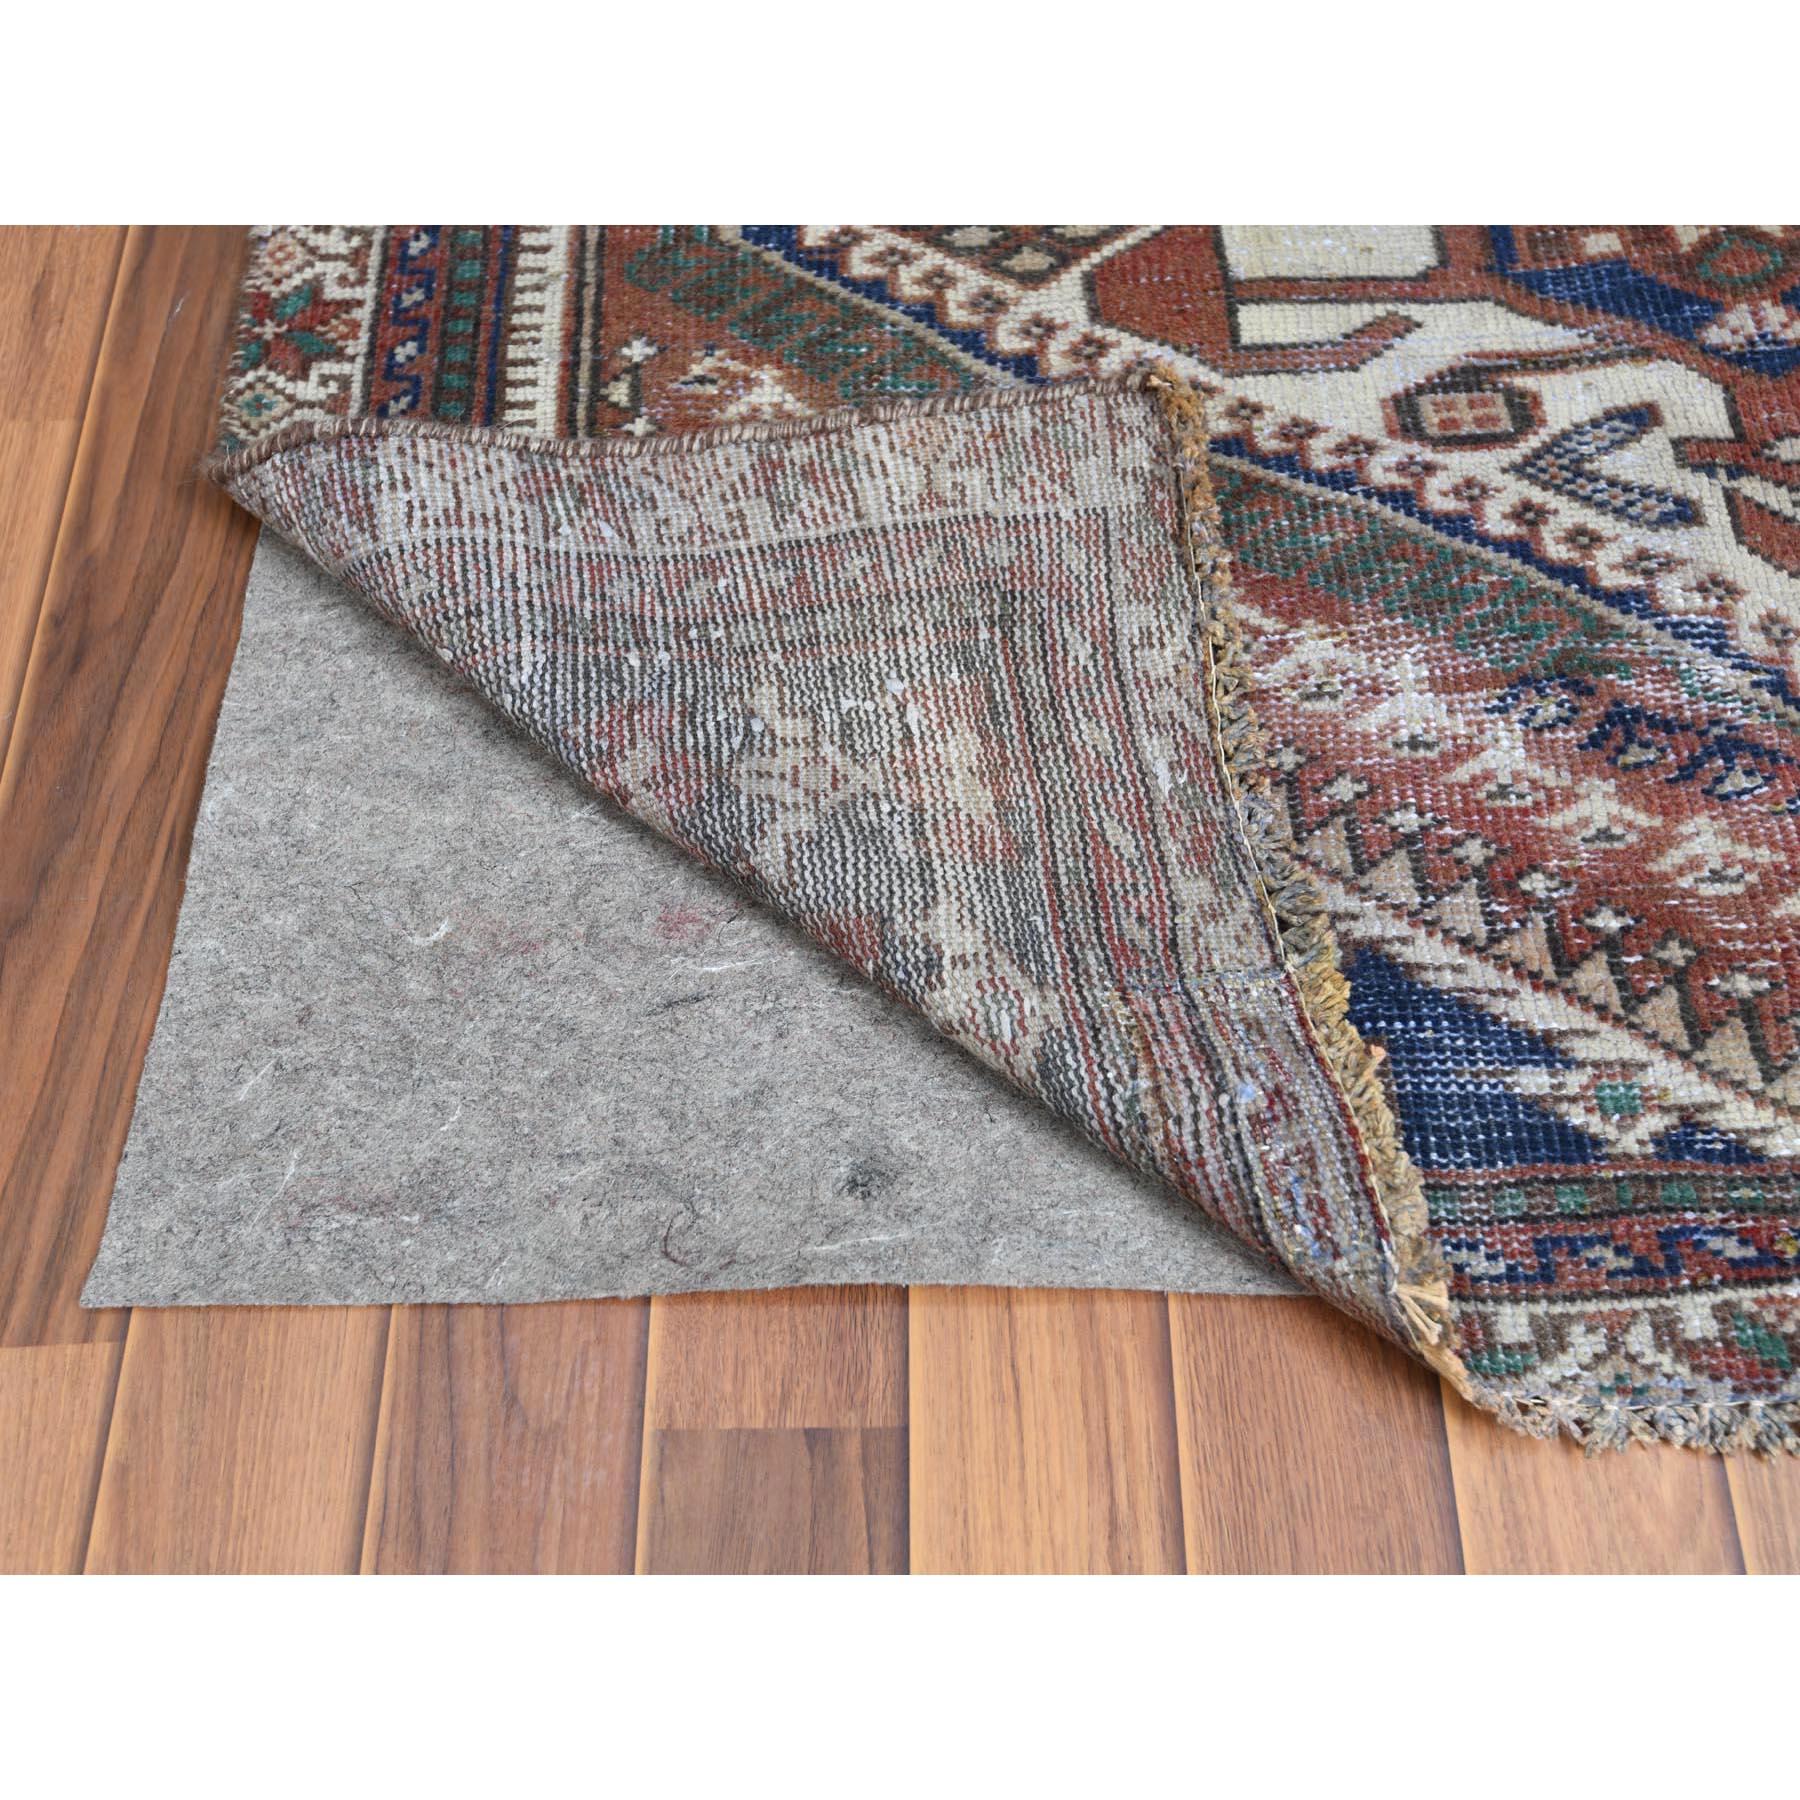 Medieval Persian Shiraz Natural Wool Old Distressed Handmade Gallery Size Runner Rug